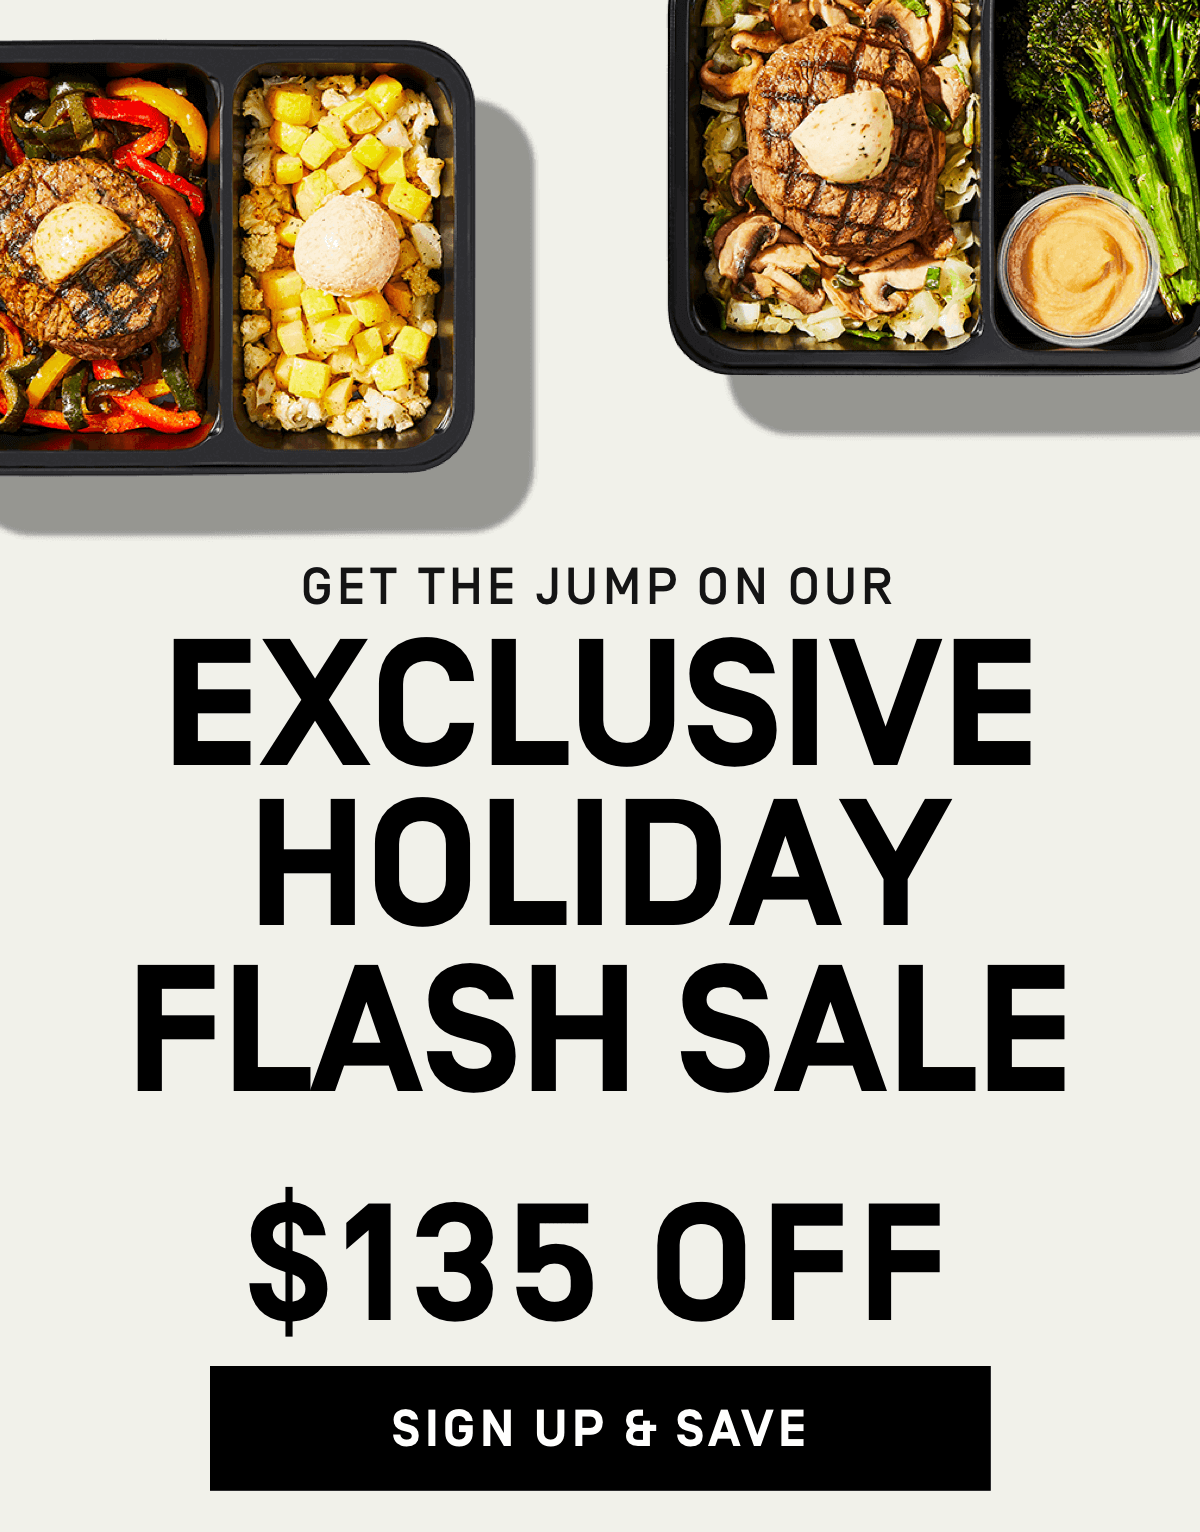 Get the jump on our exclusive holiday flash sale! Get $135 OFF | Activate Offer Want nutritious, flavorful meals without the effort? Let Factor do the cooking for you. Get $130 Off | Sign Up & Save